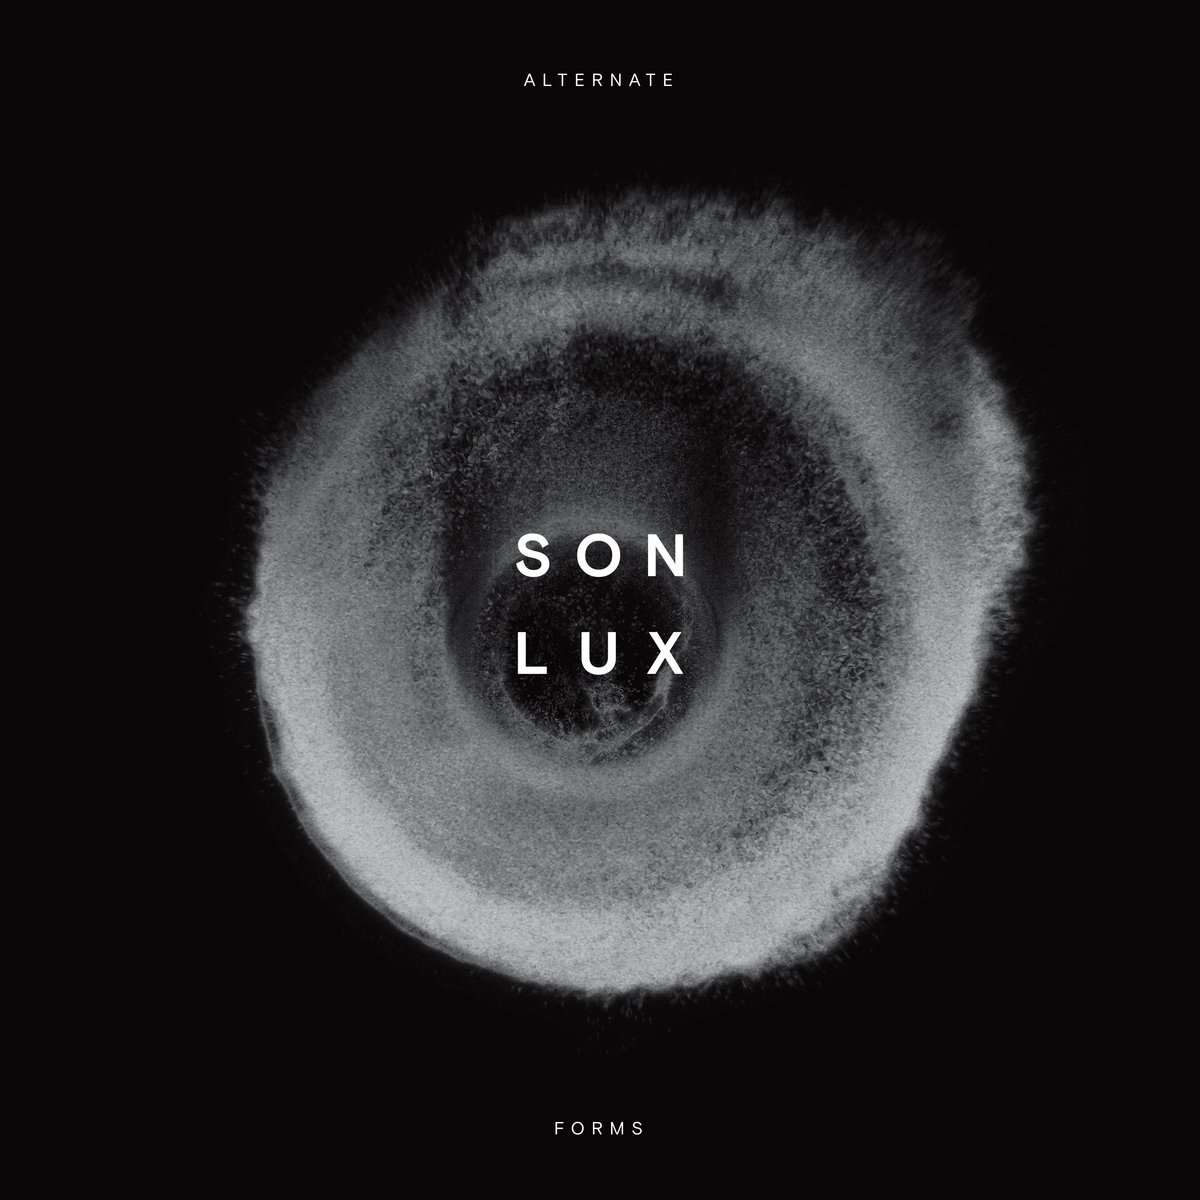 Son Lux – "Alternate Forms"